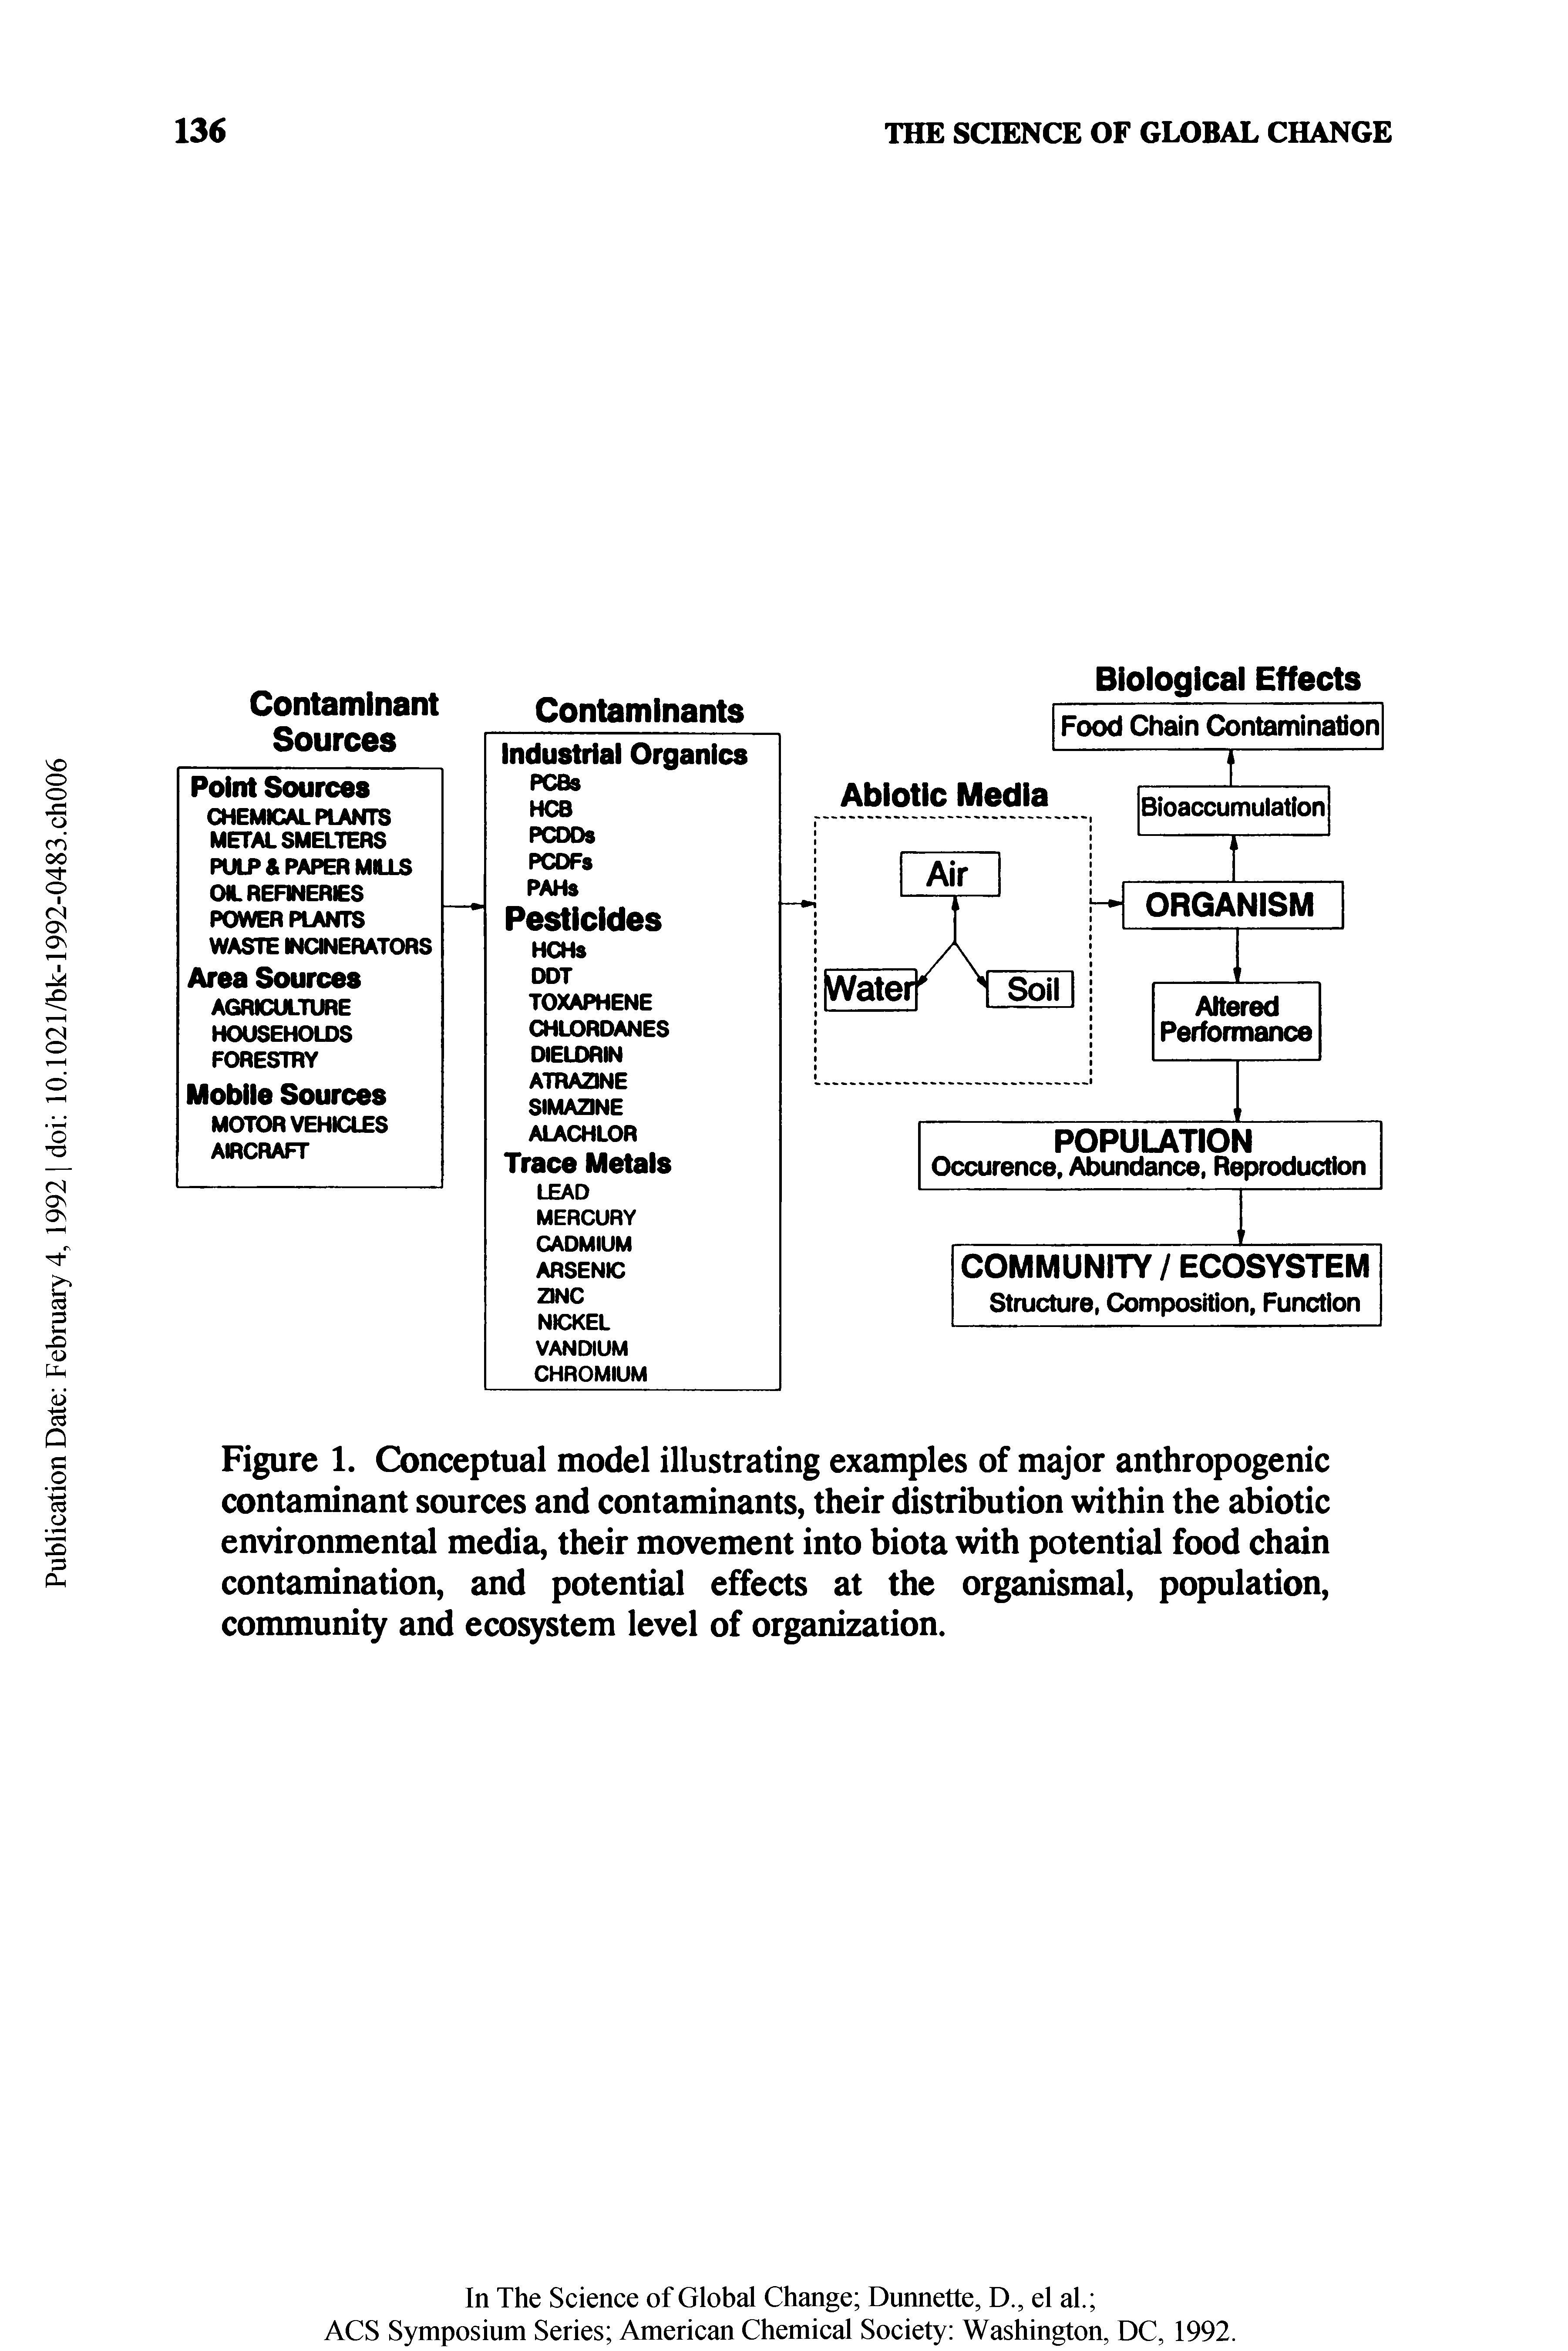 Figure 1. Conceptual model illustrating examples of major anthropogenic contaminant sources and contaminants, their distribution within the abiotic environmental media, their movement into biota with potential food chain contamination, and potential effects at the organismal, population, conmiunity and ecosystem level of organization.